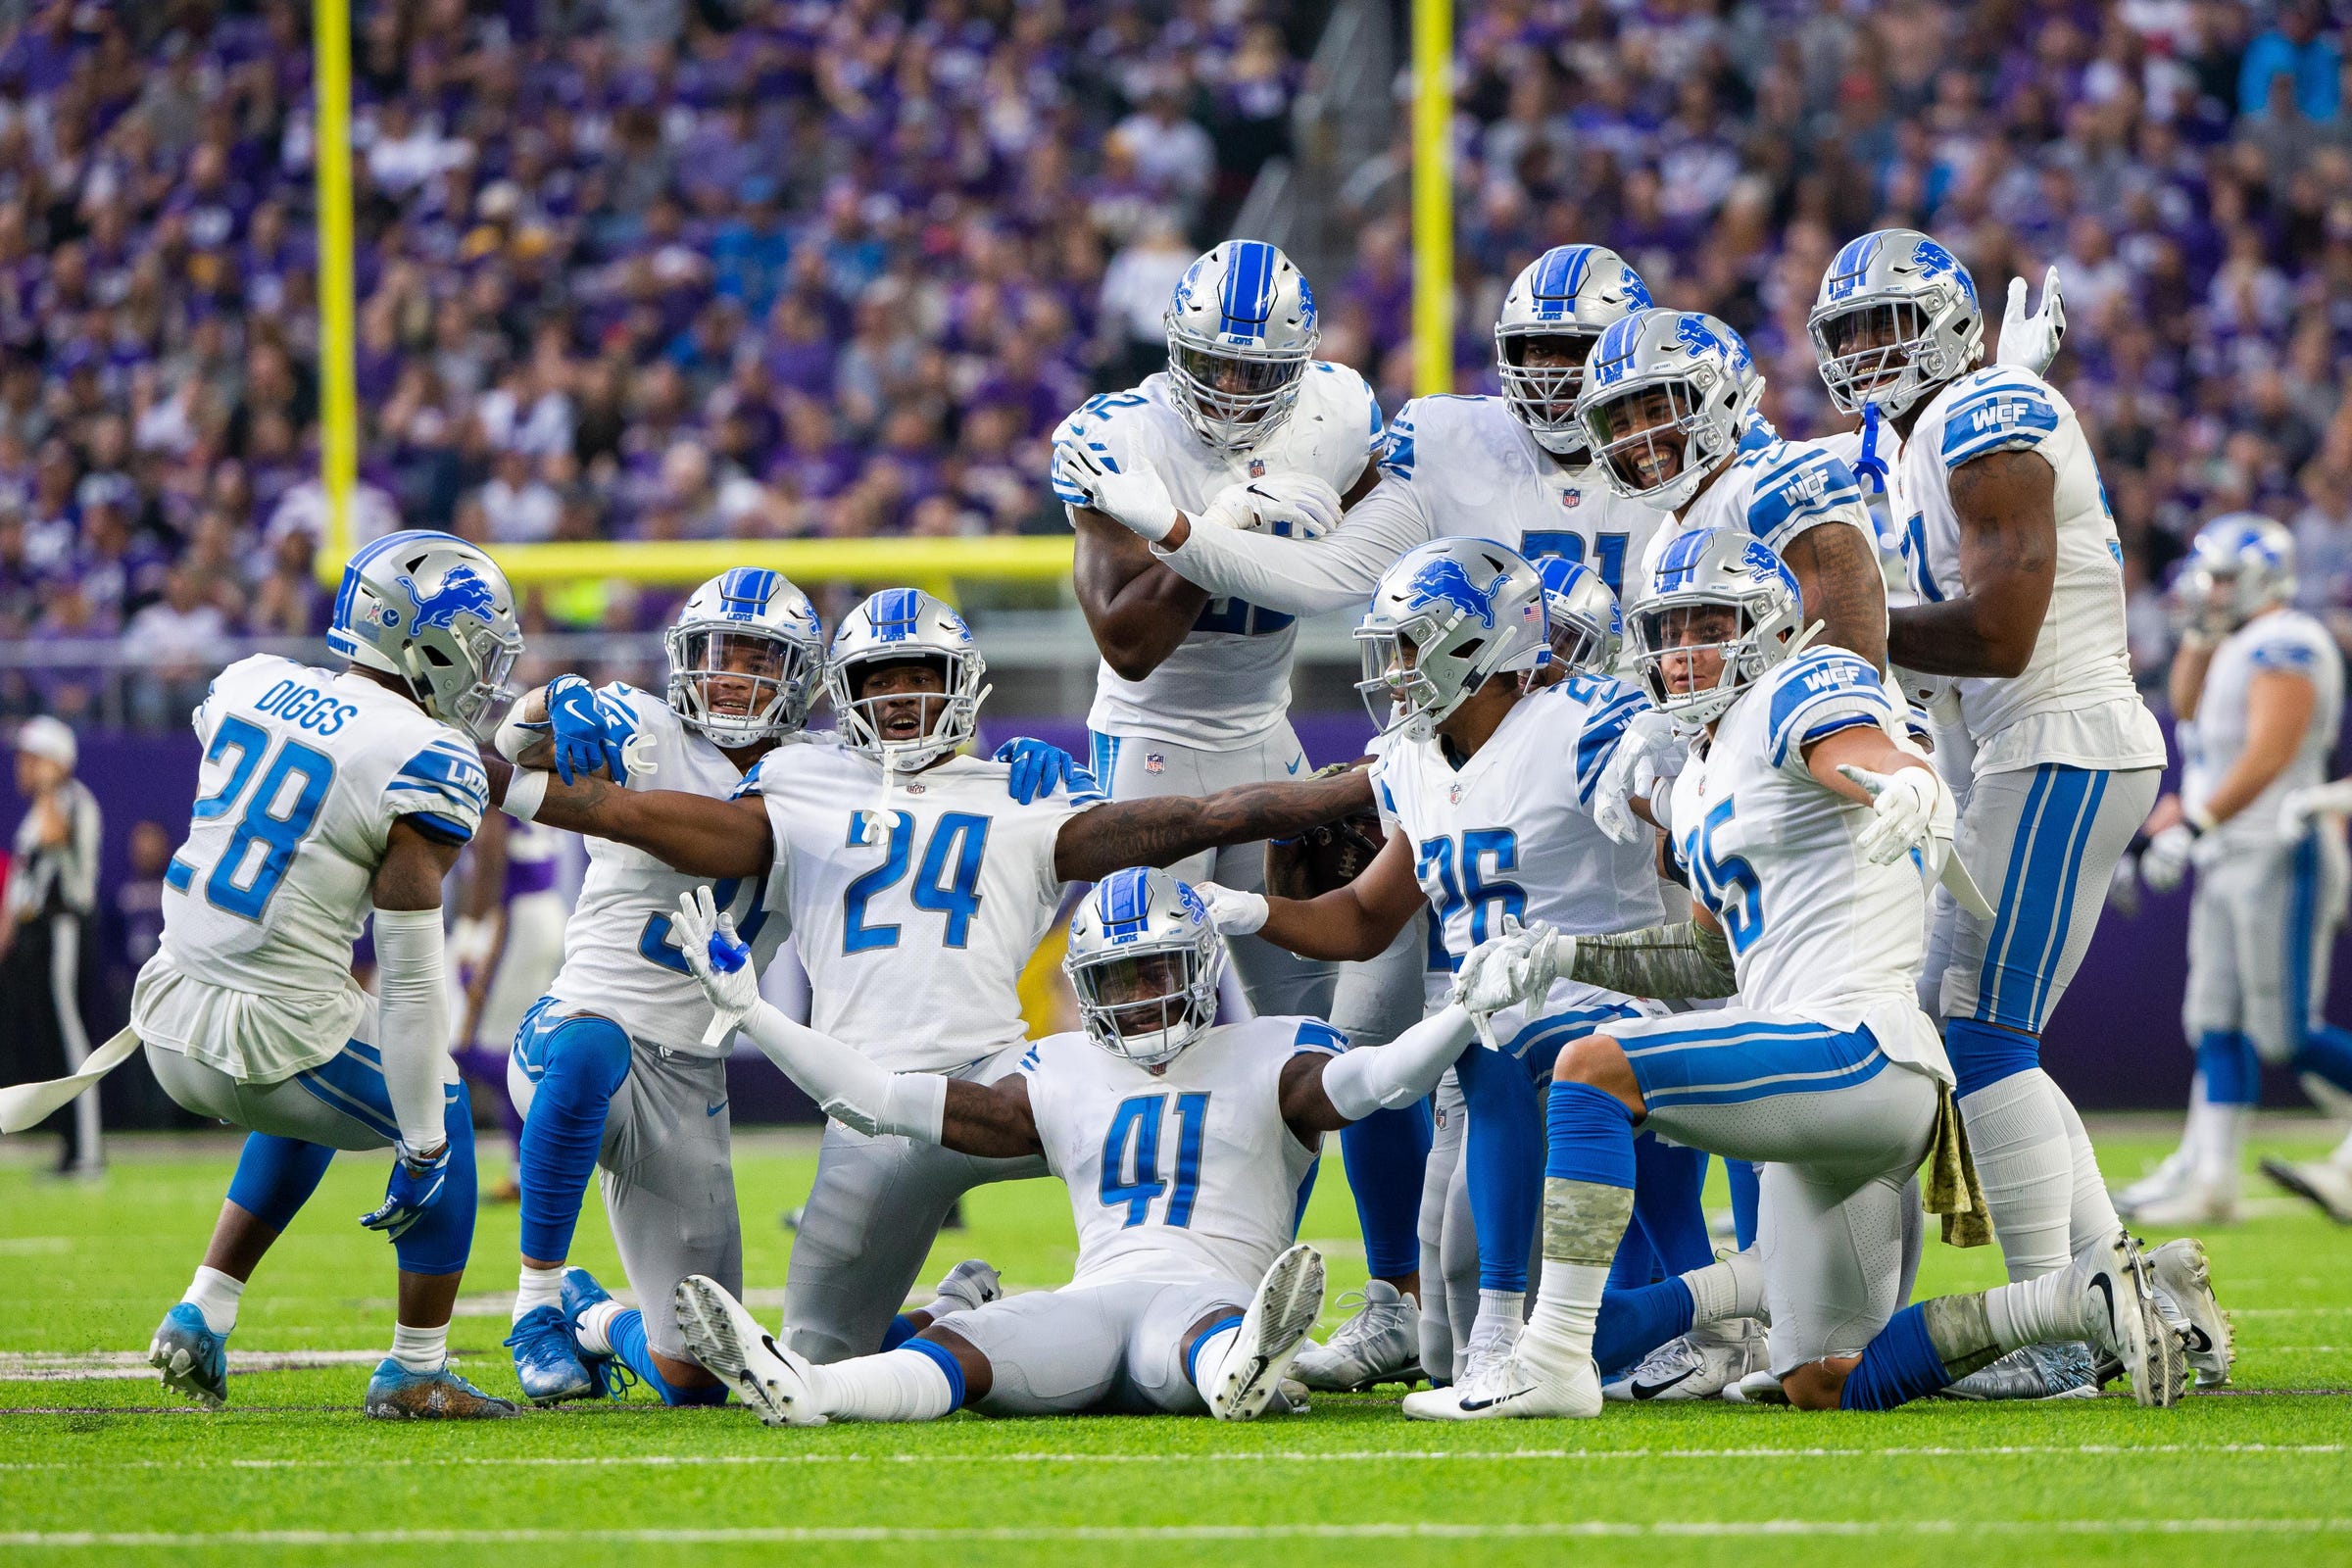 Glover Quin: Don't count Detroit Lions out of playoff hunt yet